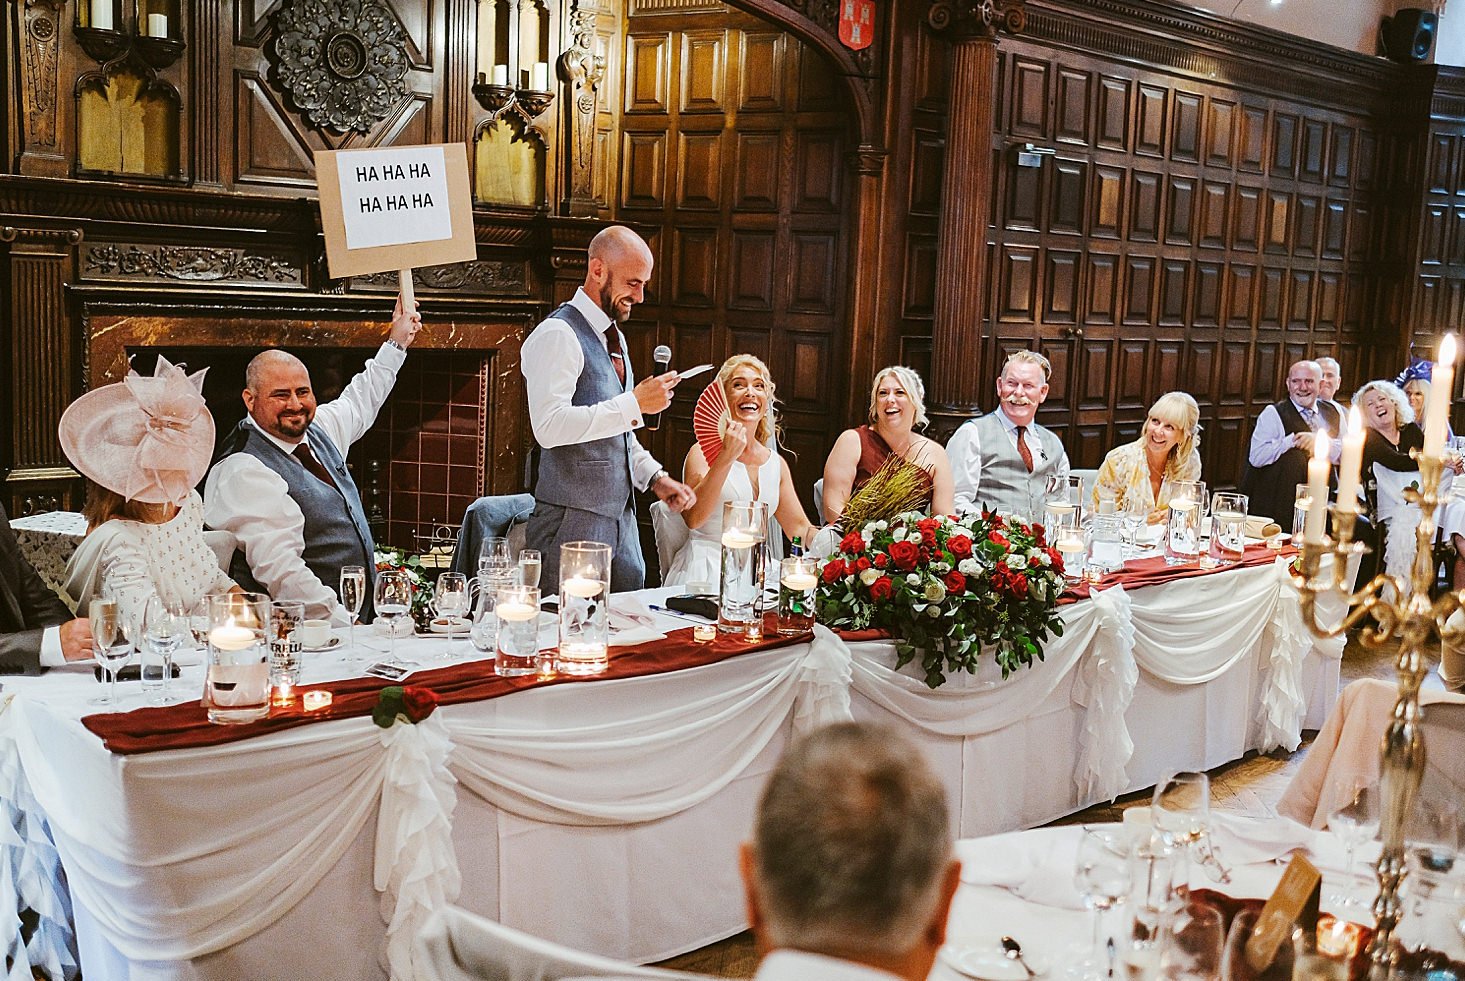 Reflecting on the journey with laughter - Groom Craig's heartfelt speech was accompanied by his best man's playful support.

@jesmonddenehouse 

#wedding #weddings #weddingday #photo #photography #photographer #weddingphotography #weddingphotographer